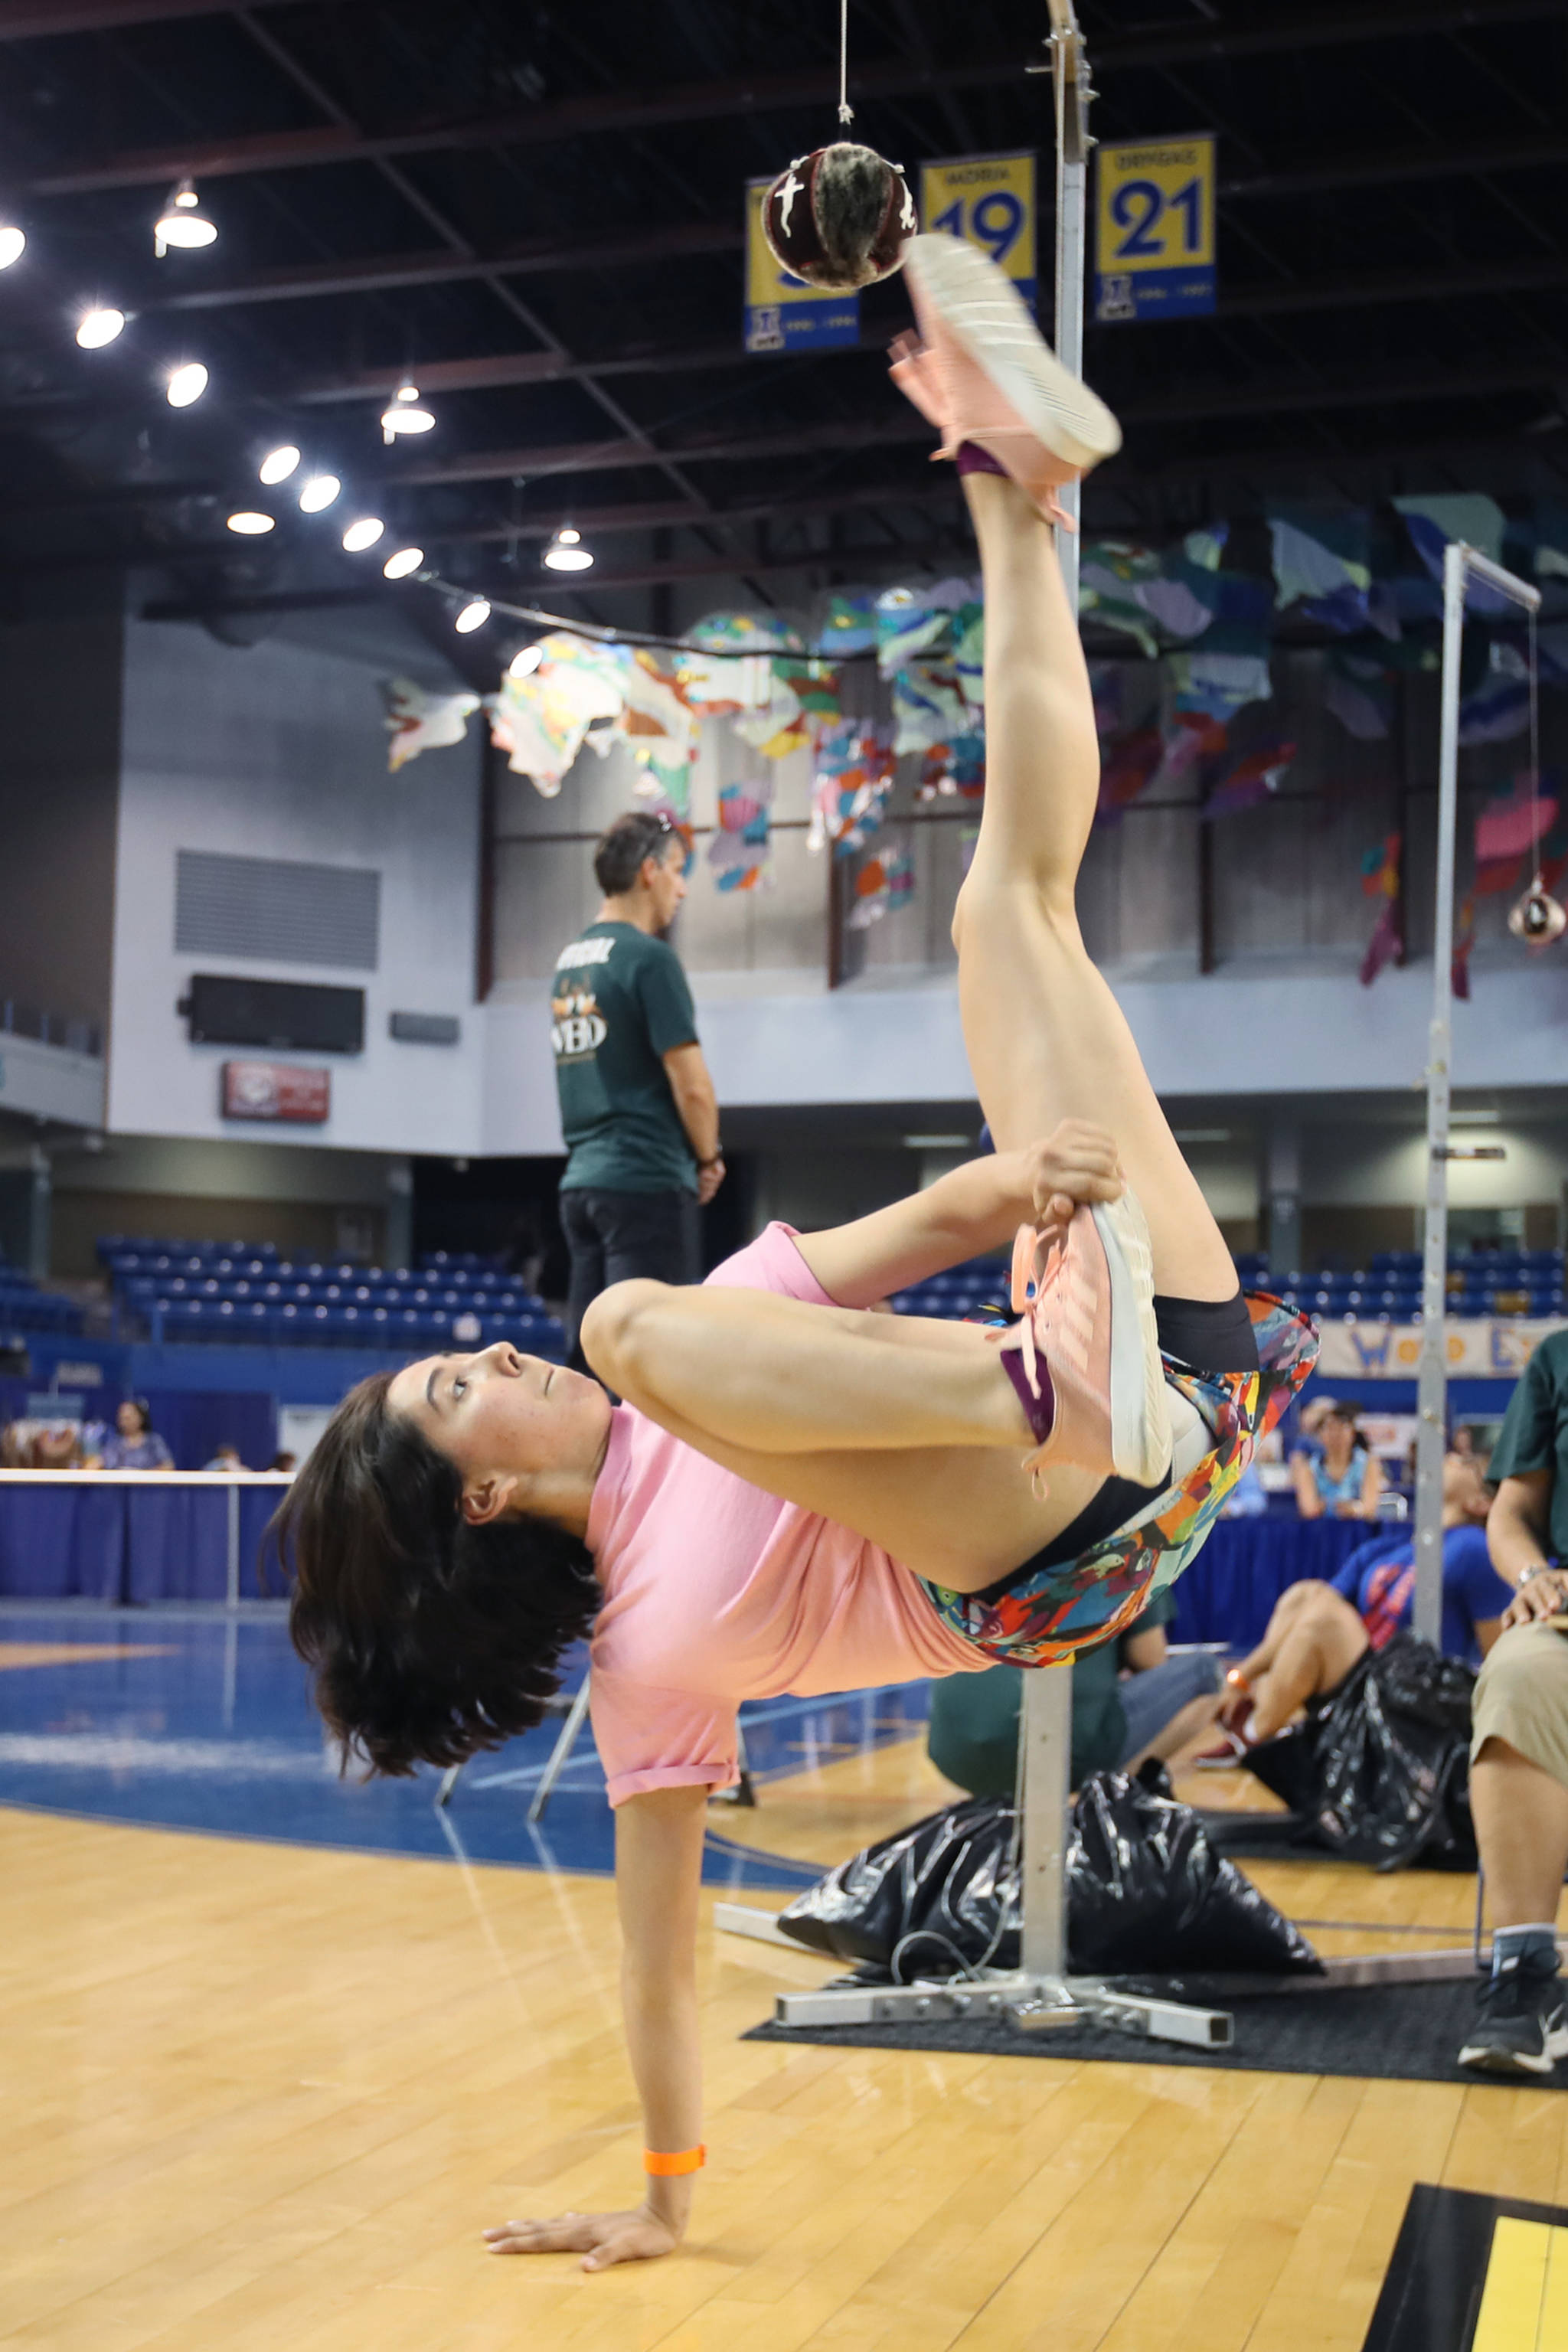 Sara Steeves of Juneau competes in the Alaskan high kick at the World-Eskimo Indian Olympics at the Carlson Center in Fairbanks on July 18, 2019. Steeves won a gold medal in the event with her kick of 72 inches. (Greg Lincoln | For the Juneau Empire)